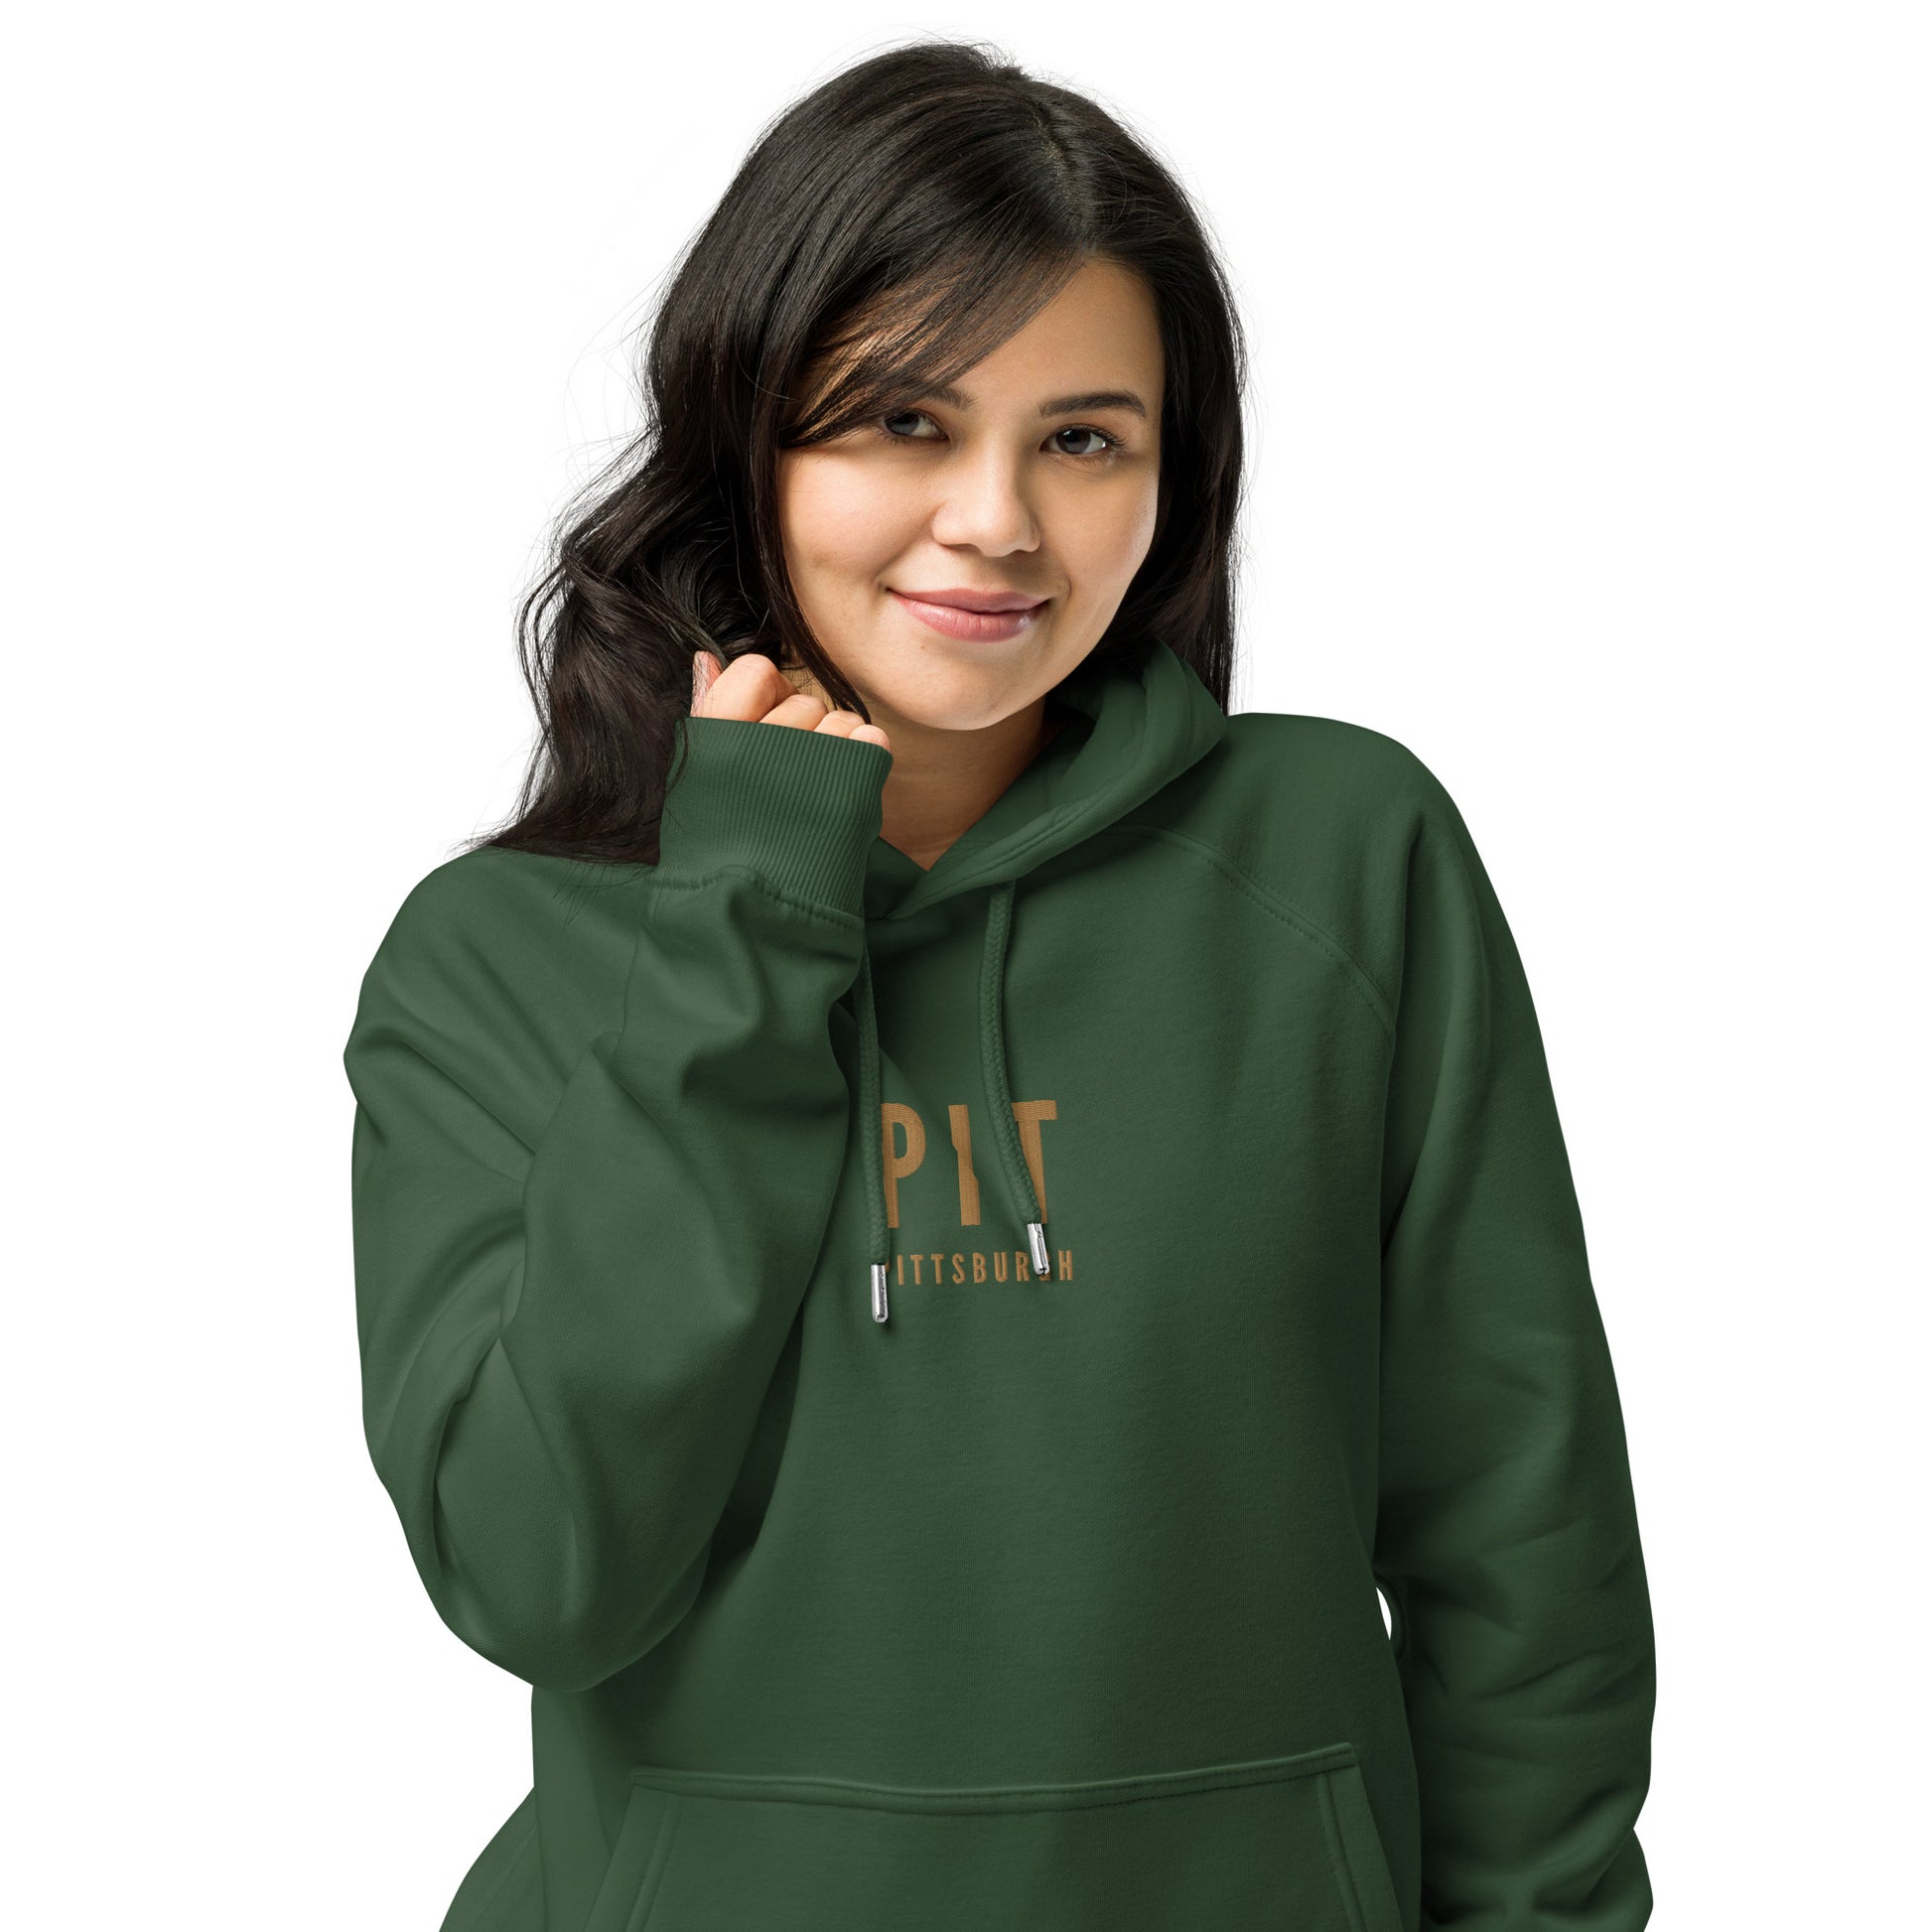 City Organic Hoodie - Old Gold • PIT Pittsburgh • YHM Designs - Image 03